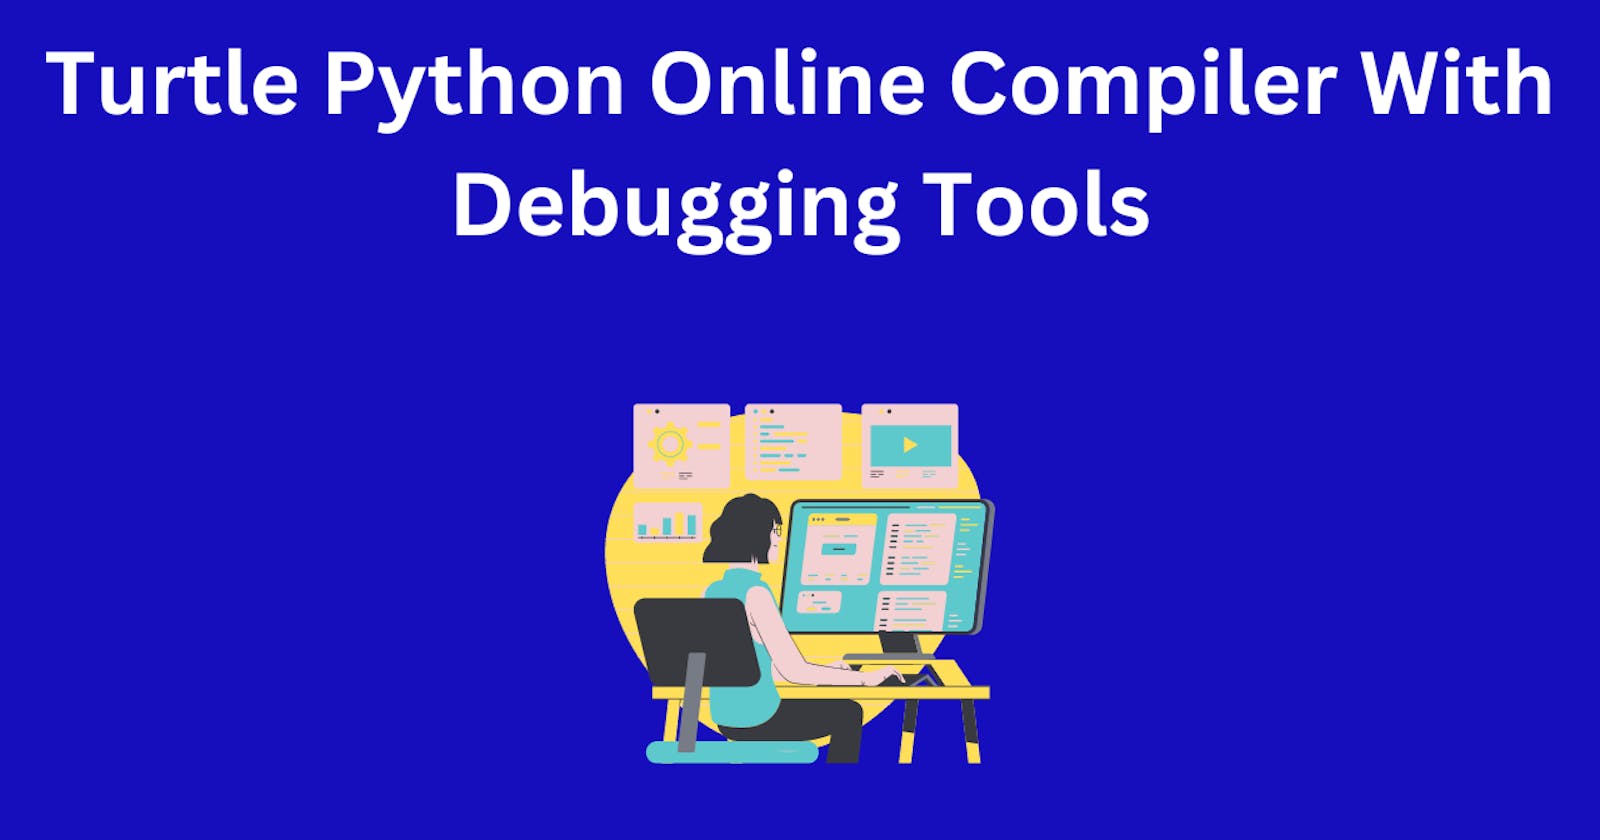 Turtle Python Online Compiler With Debugging Tools: A Powerful Tool For Learning and Creating